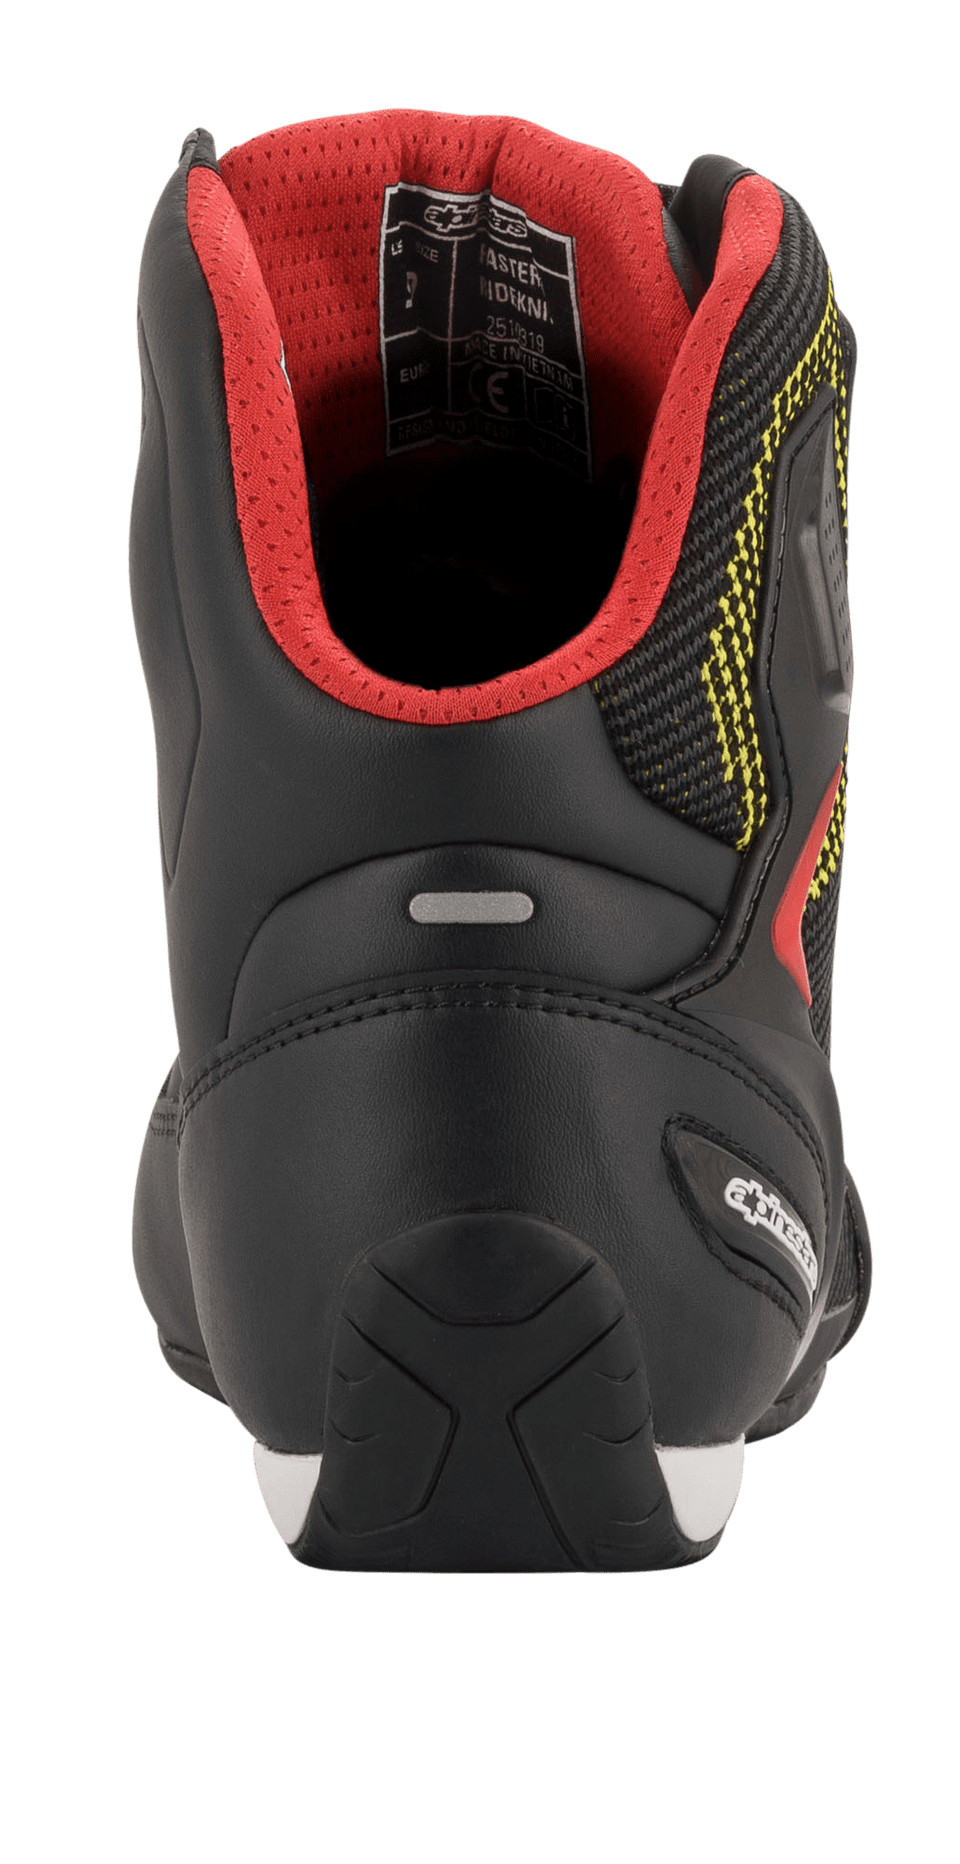 Faster-3 Rideknit® Shoes